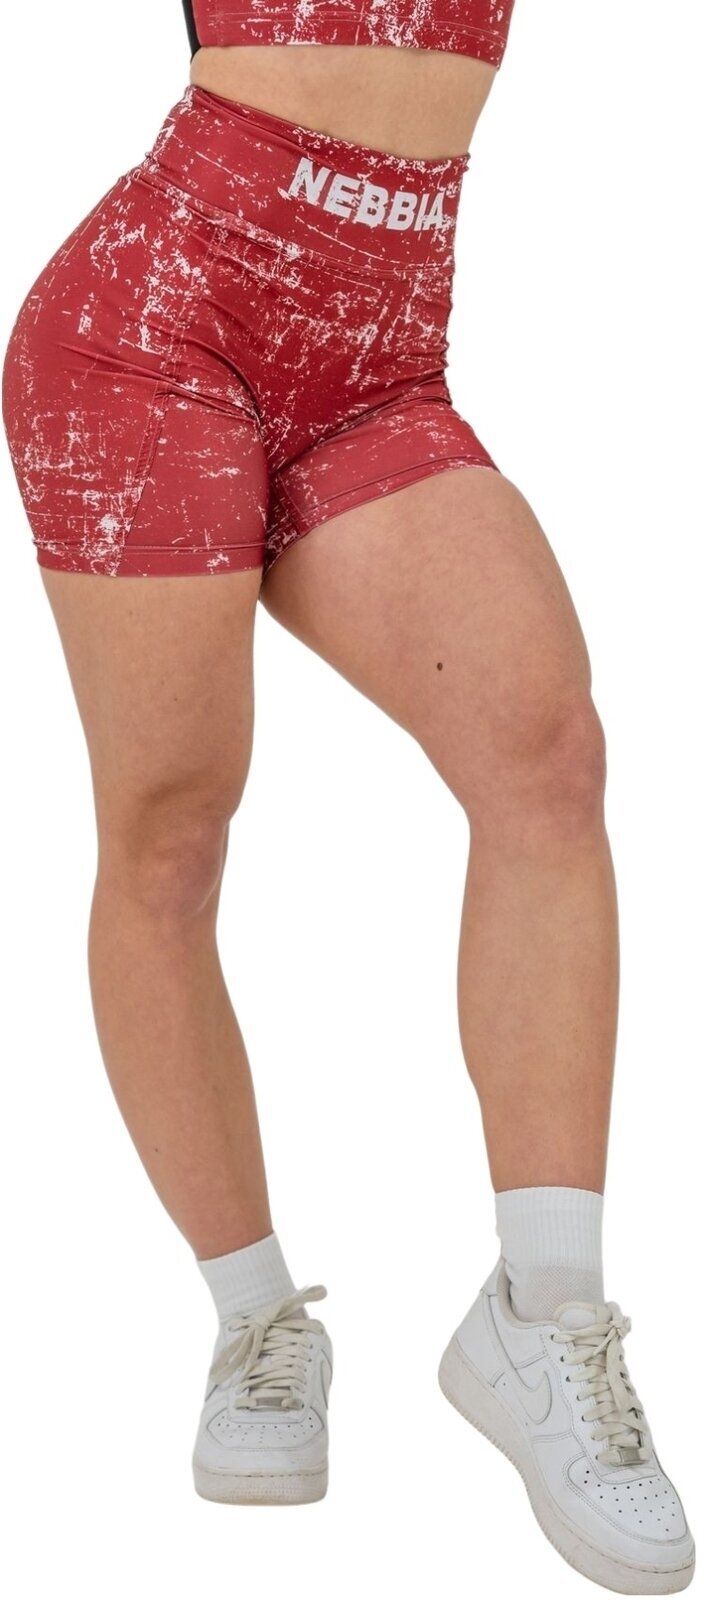 Nebbia High Waisted Leggings Shorts 5" Hammies Red S Fitness nohavice